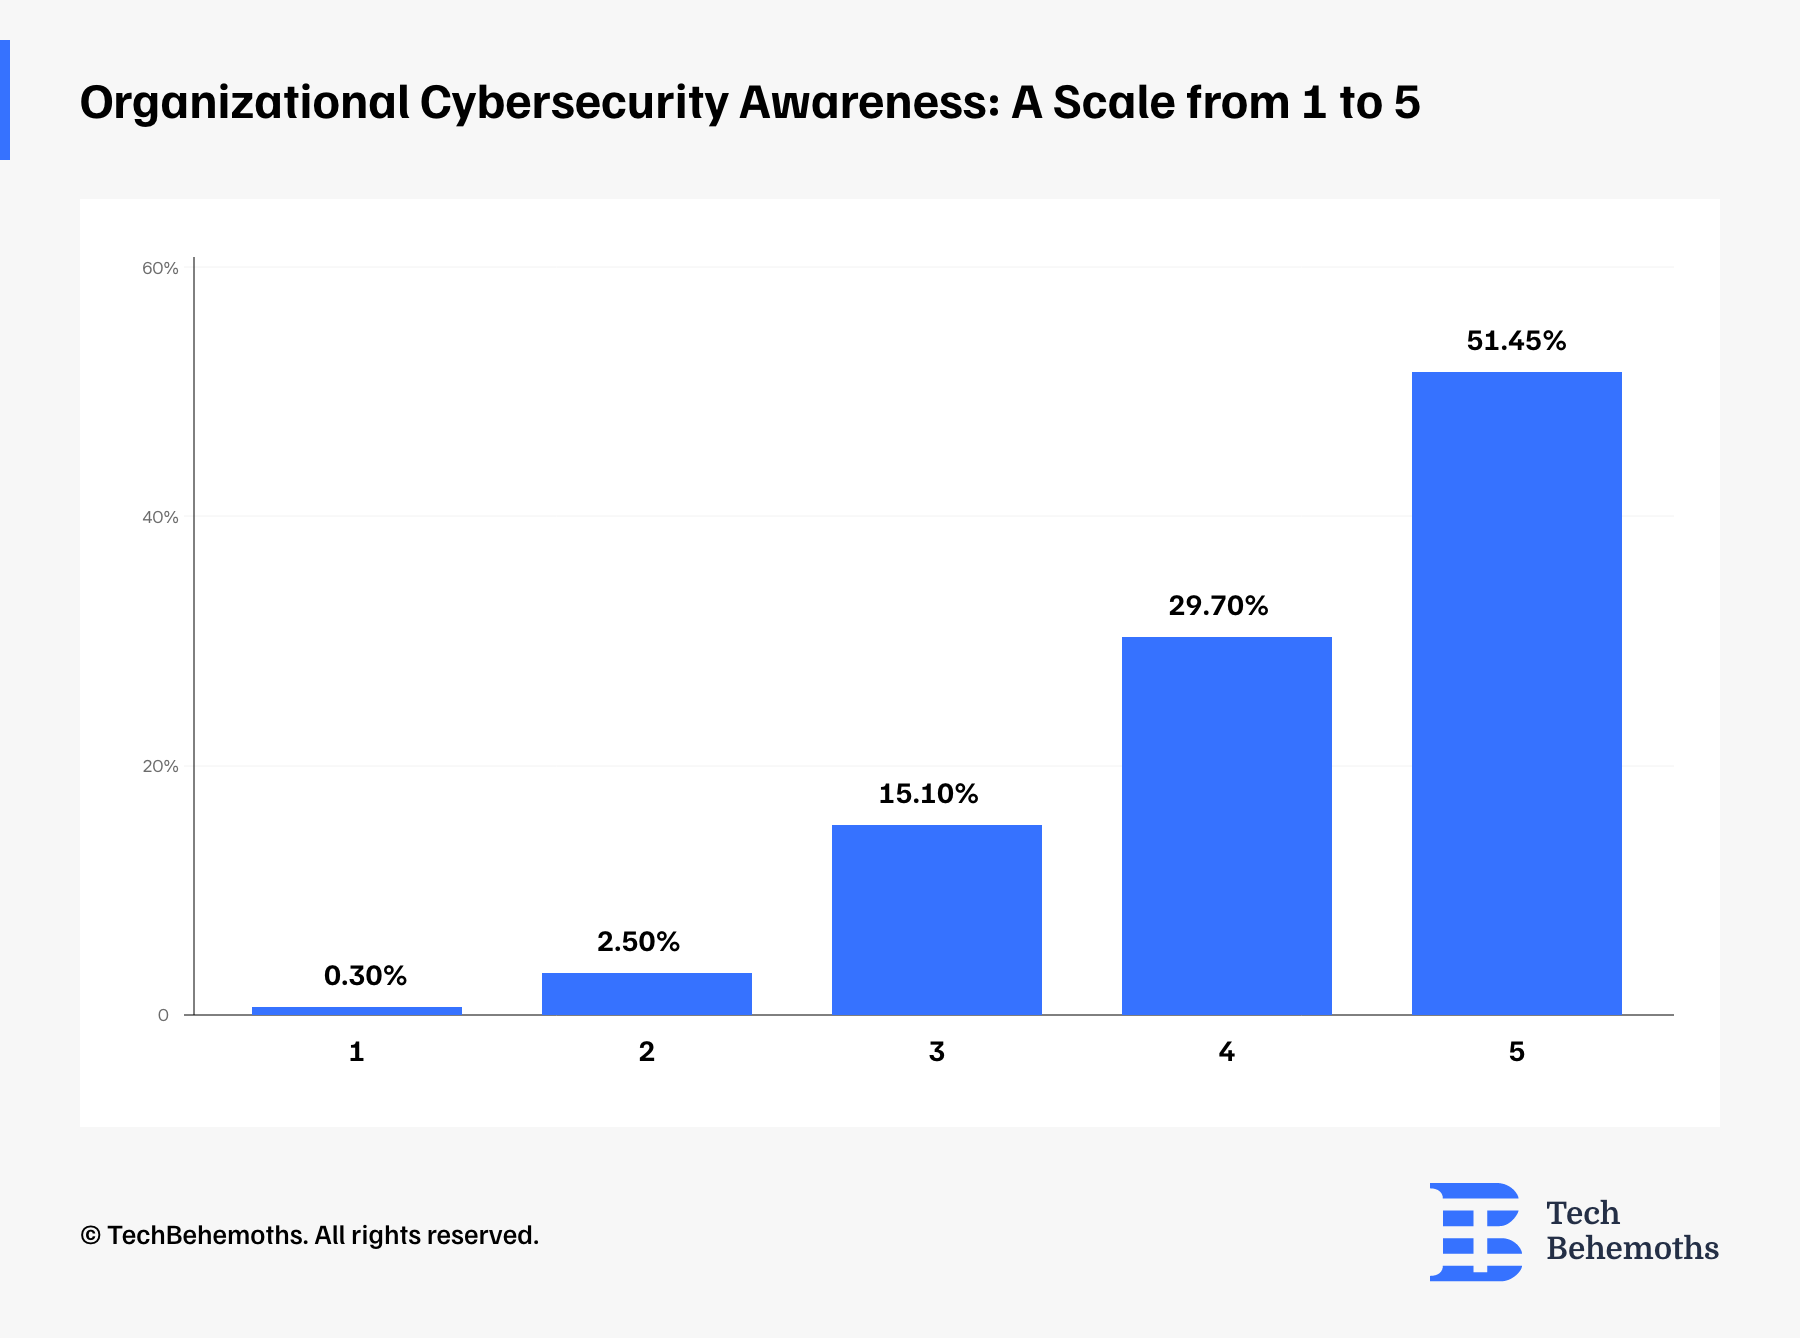 Cybersecurity Awareness: A scale from 1 to 5